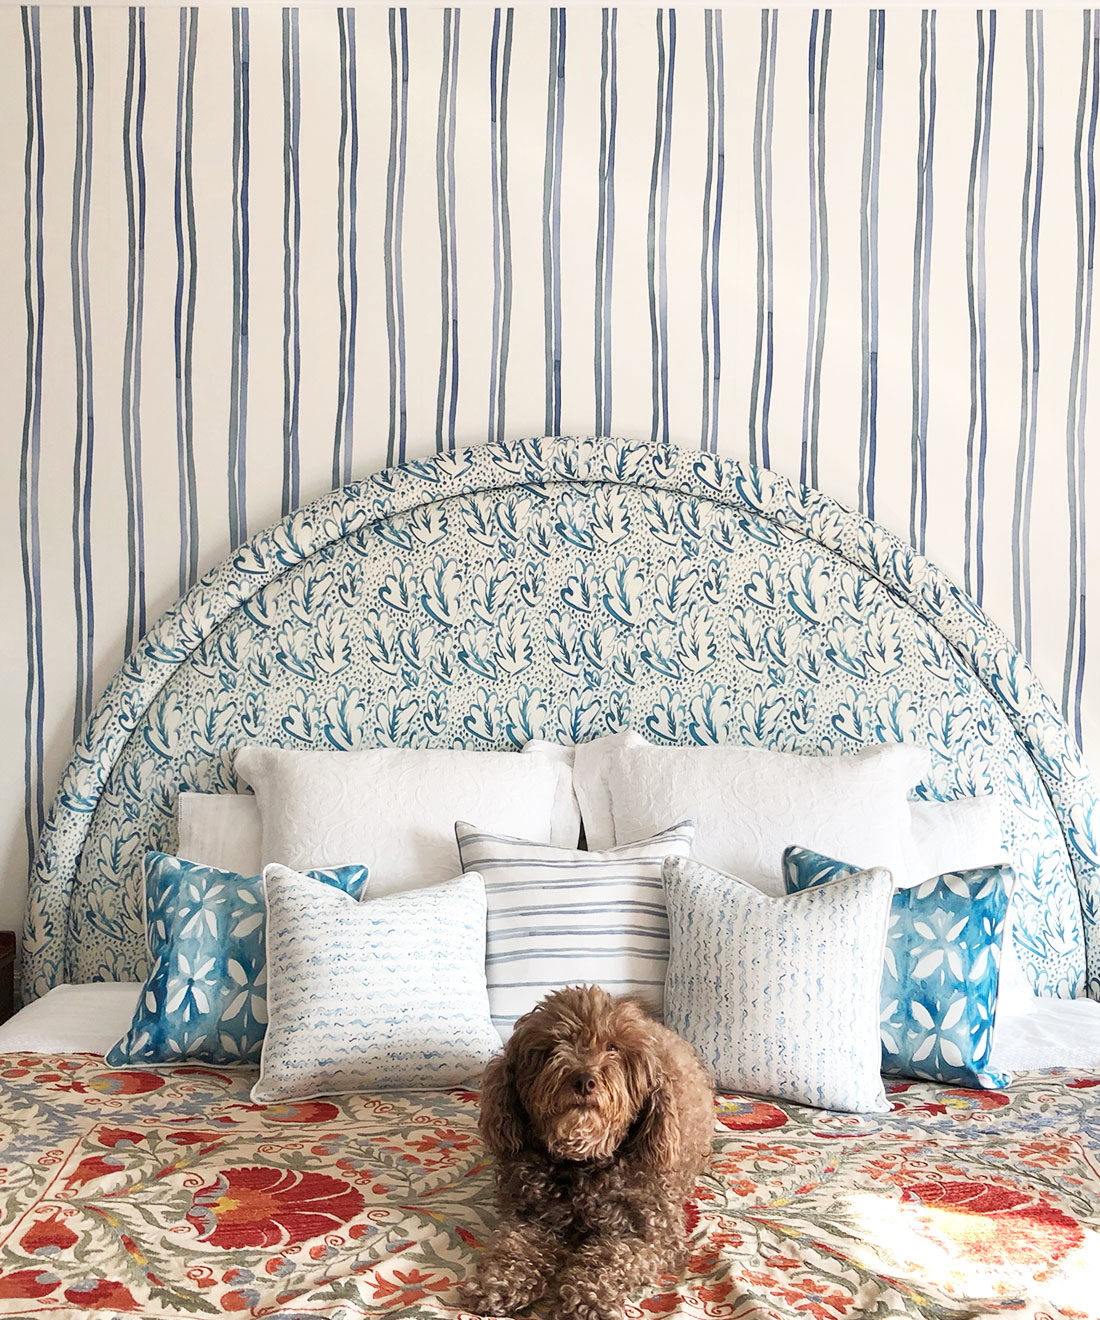 Double Inky Stripe • Striped Wallpaper • Blue Striped Wallpaper Rolls • Georgia MacMillan • Milton & King Europe • Bedroom wallpaper showing a bed with a brown dog